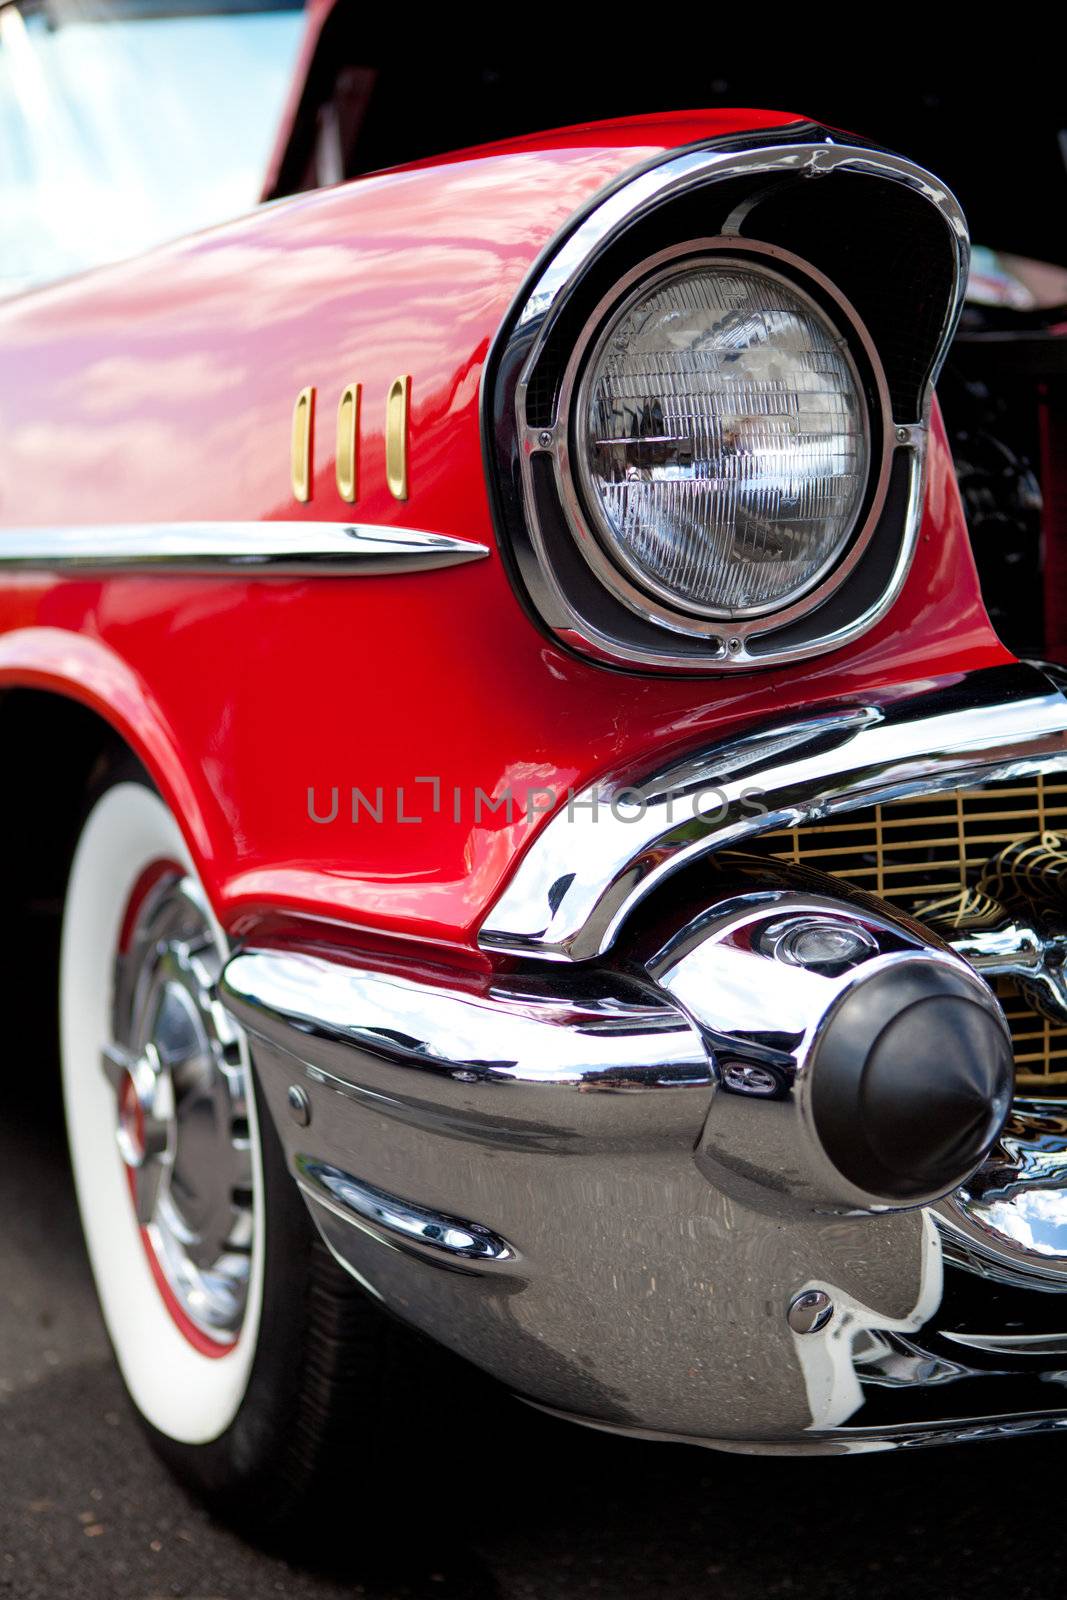 A closeup of the headlight and front bumper on a vintage American automobile.